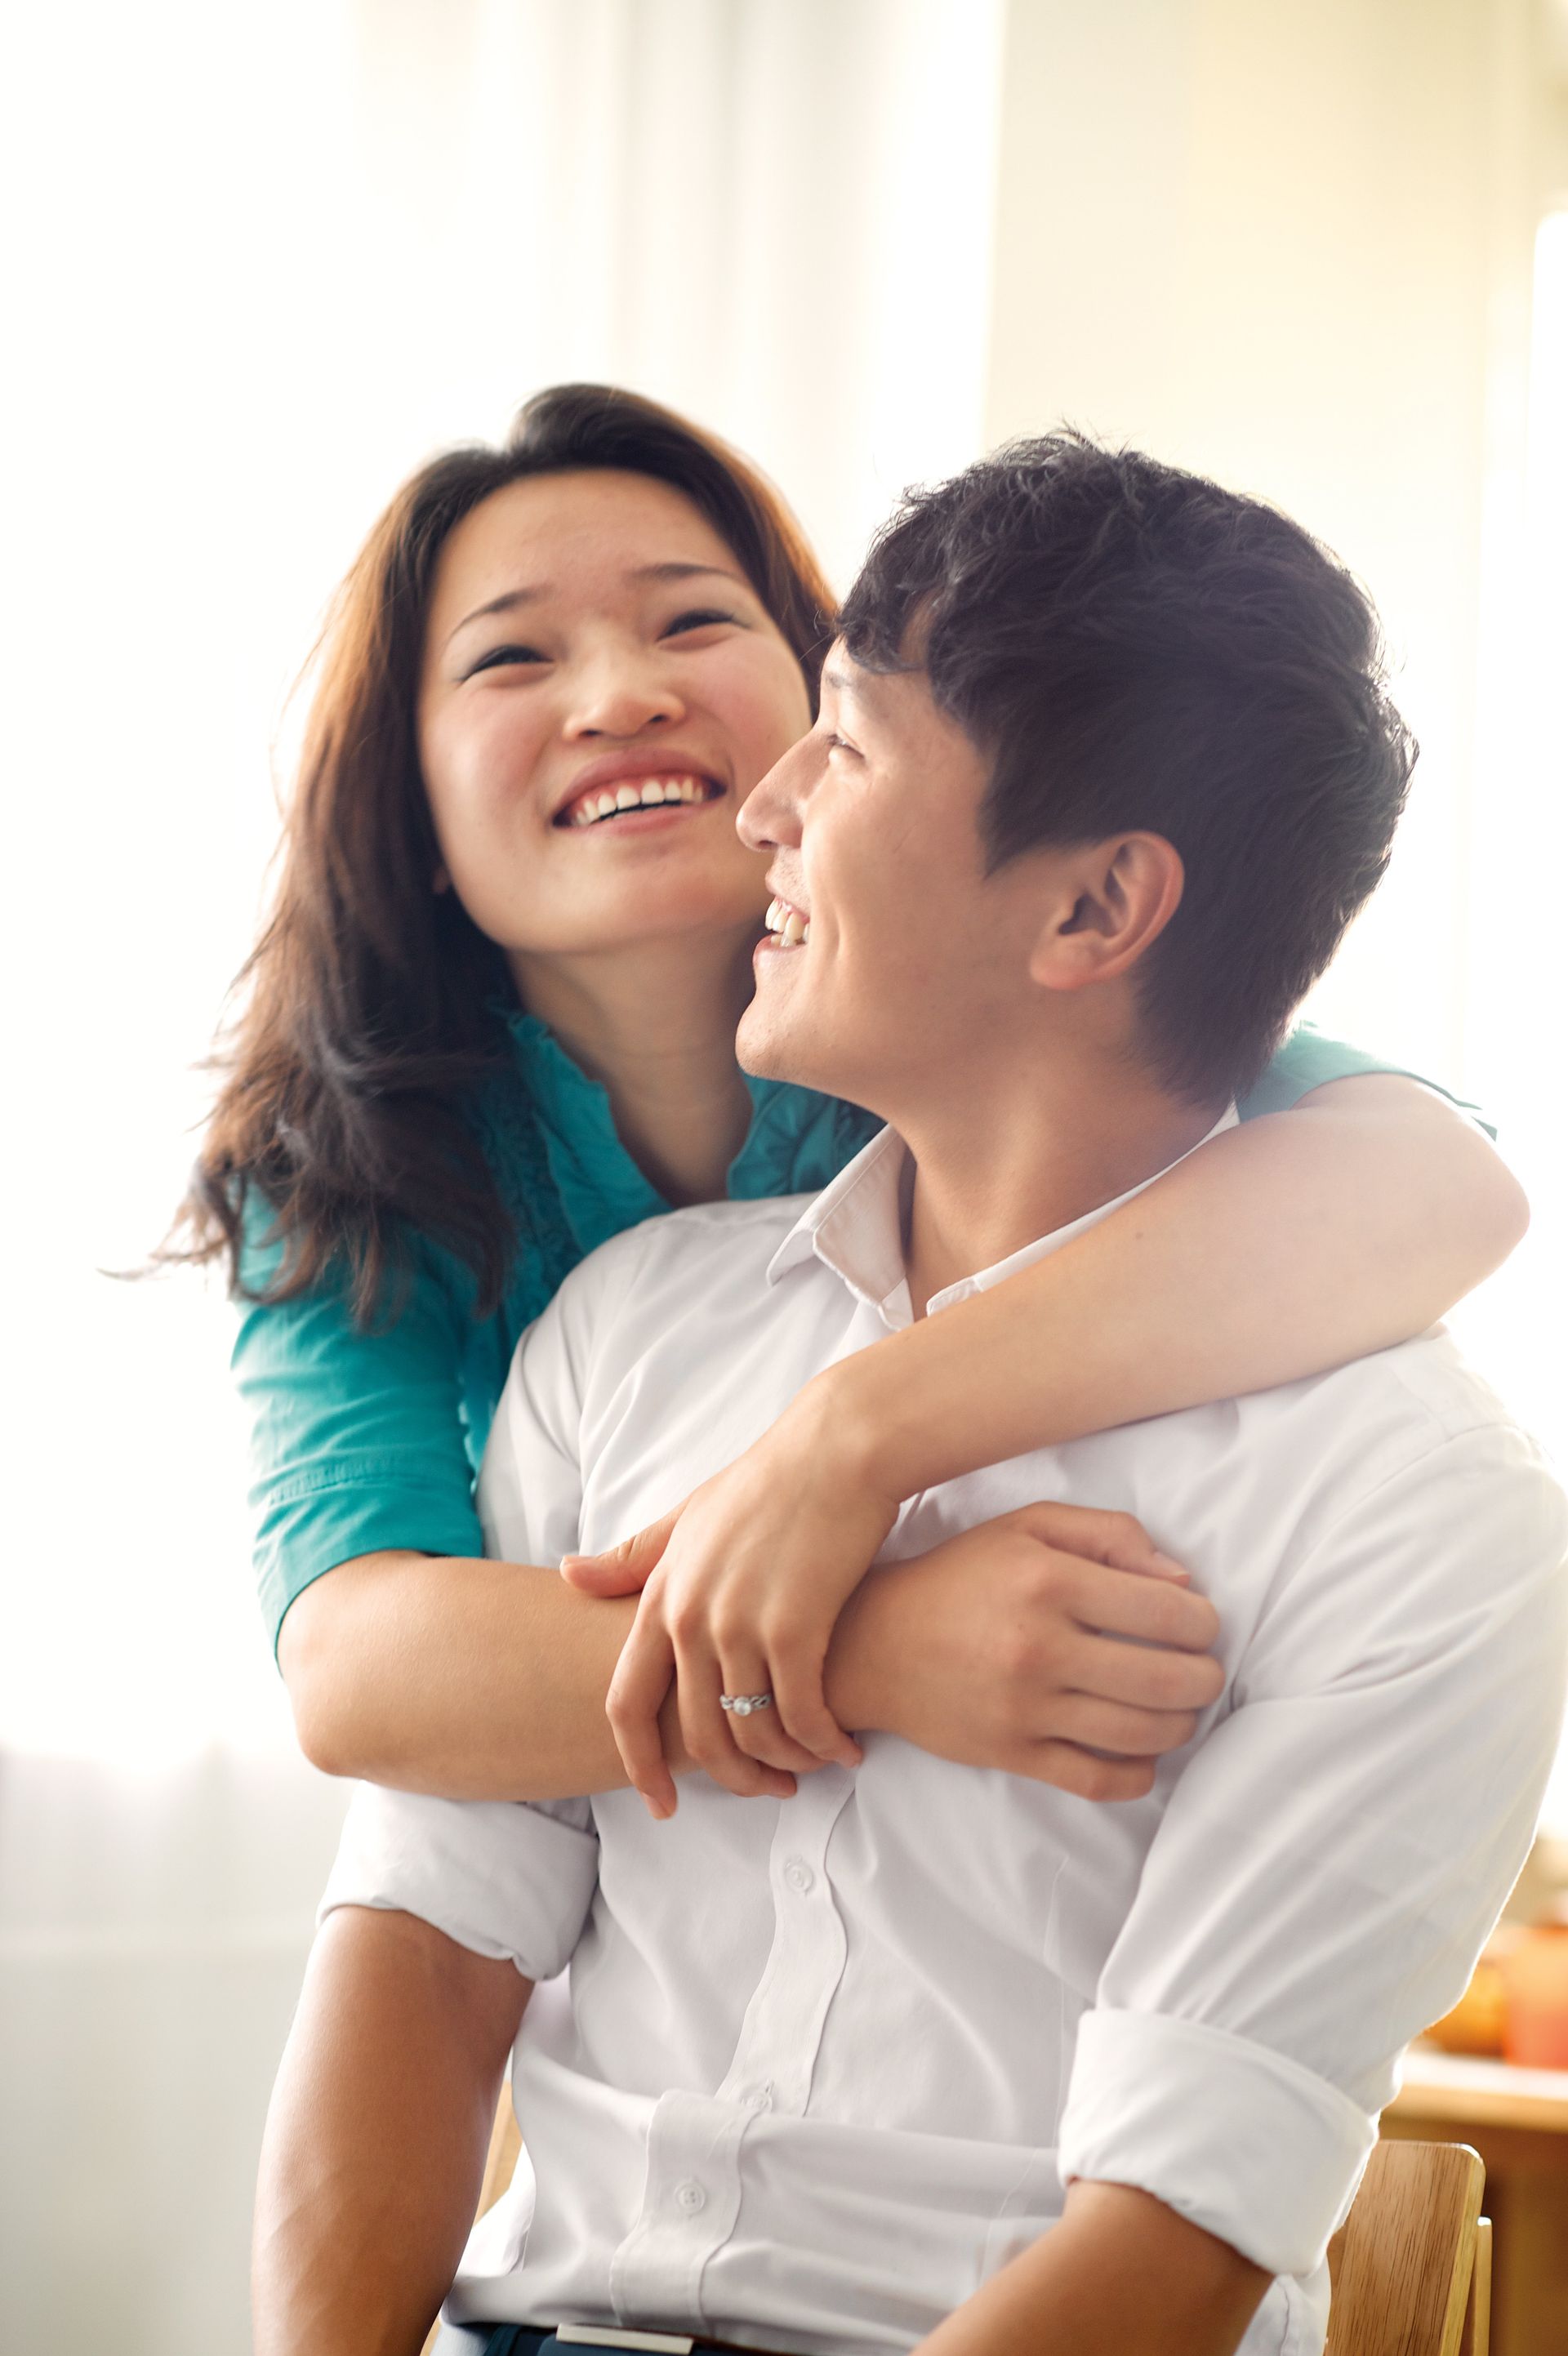 A portrait of a young couple hugging and smiling.